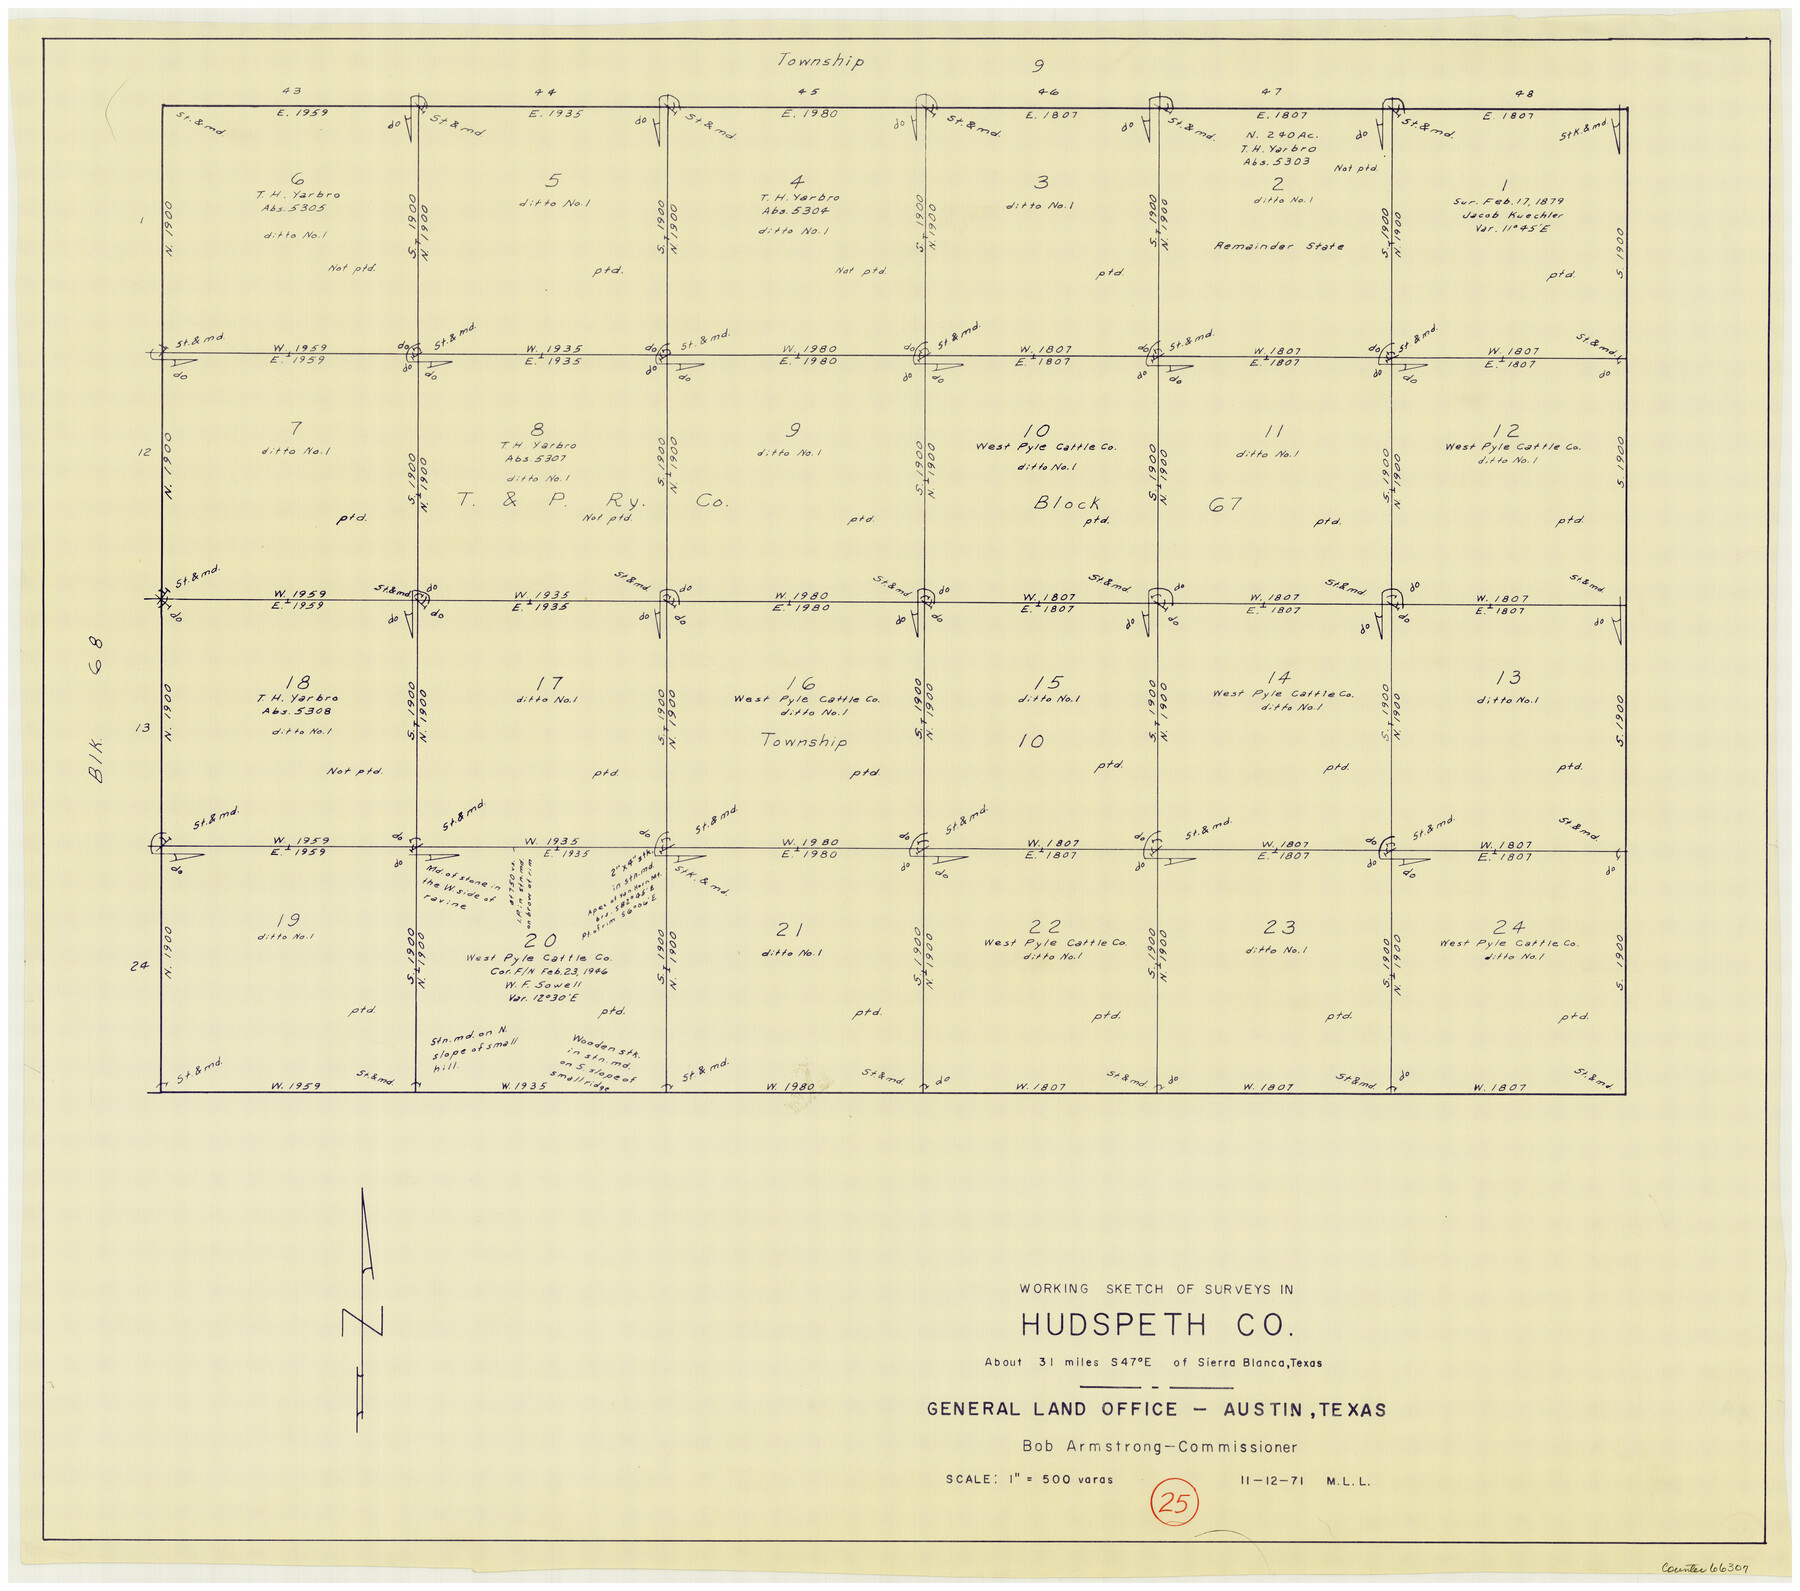 66307, Hudspeth County Working Sketch 25, General Map Collection